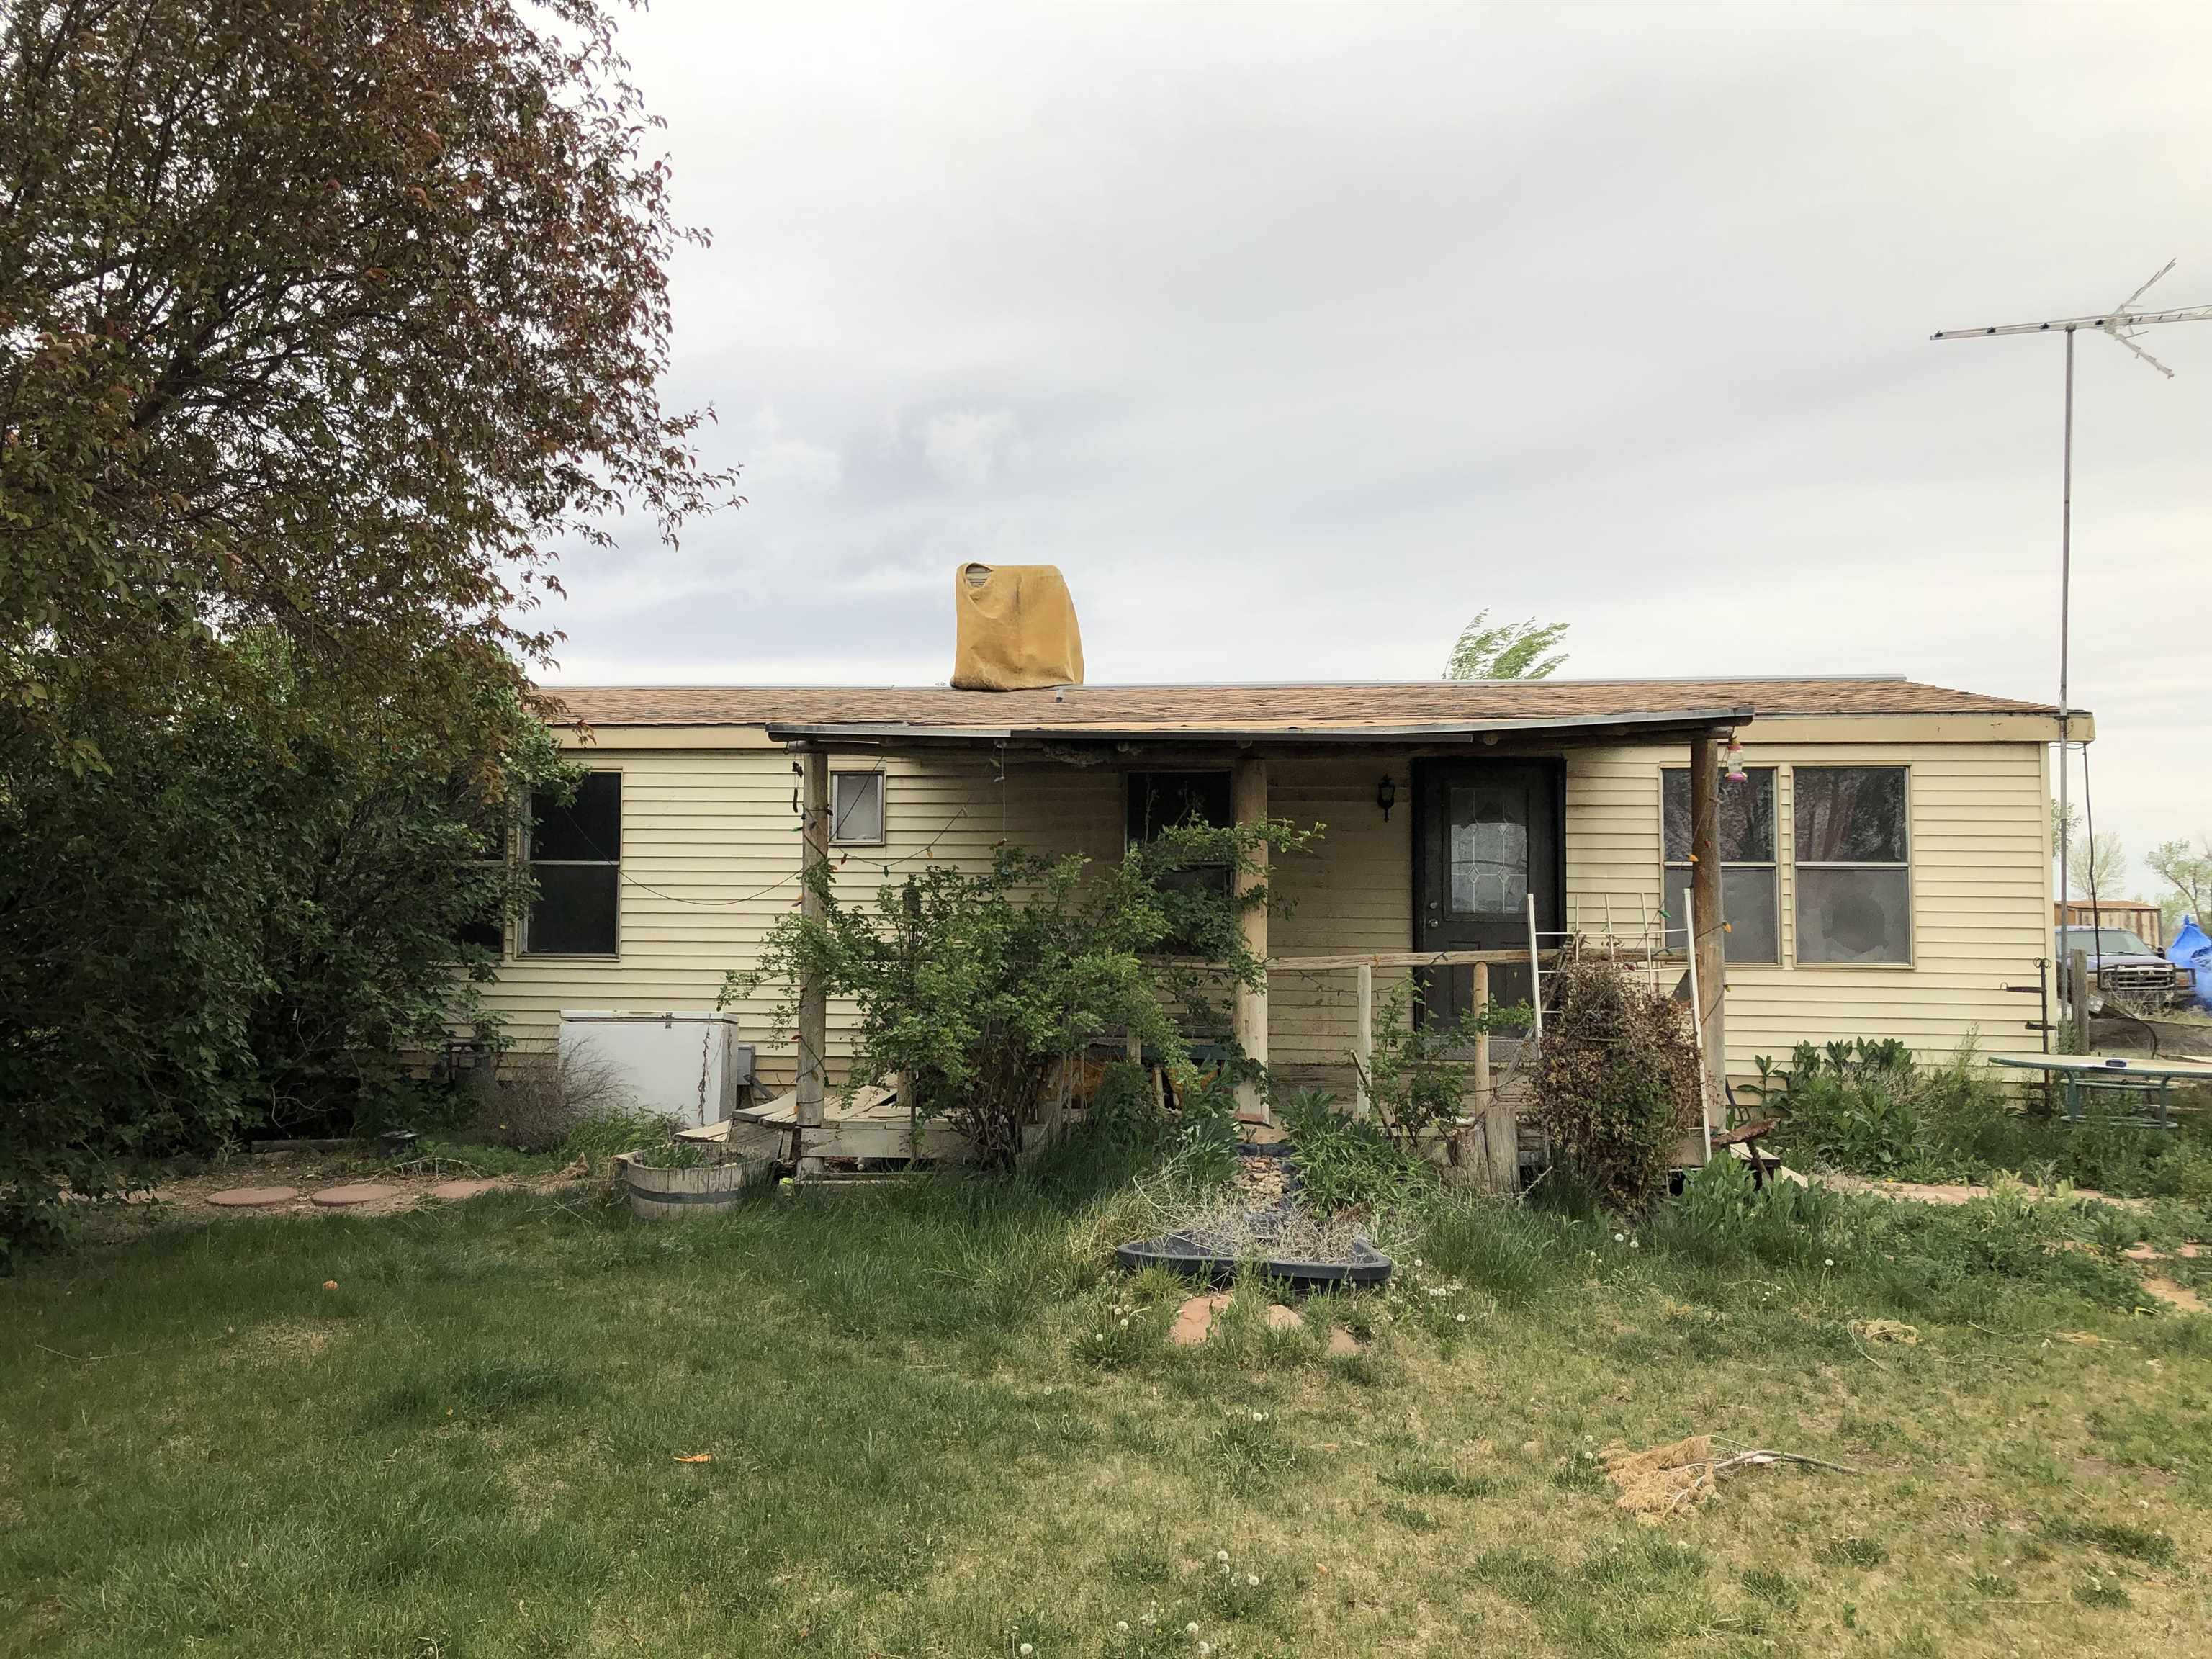 Come all investors! Over 3 acres currently zones residential, but all neighboring homes have been re-zoned to commercial, so possibilities are endless. Turn this property into your dream farm, with some TLC you can bring the whole family and have plenty of room.